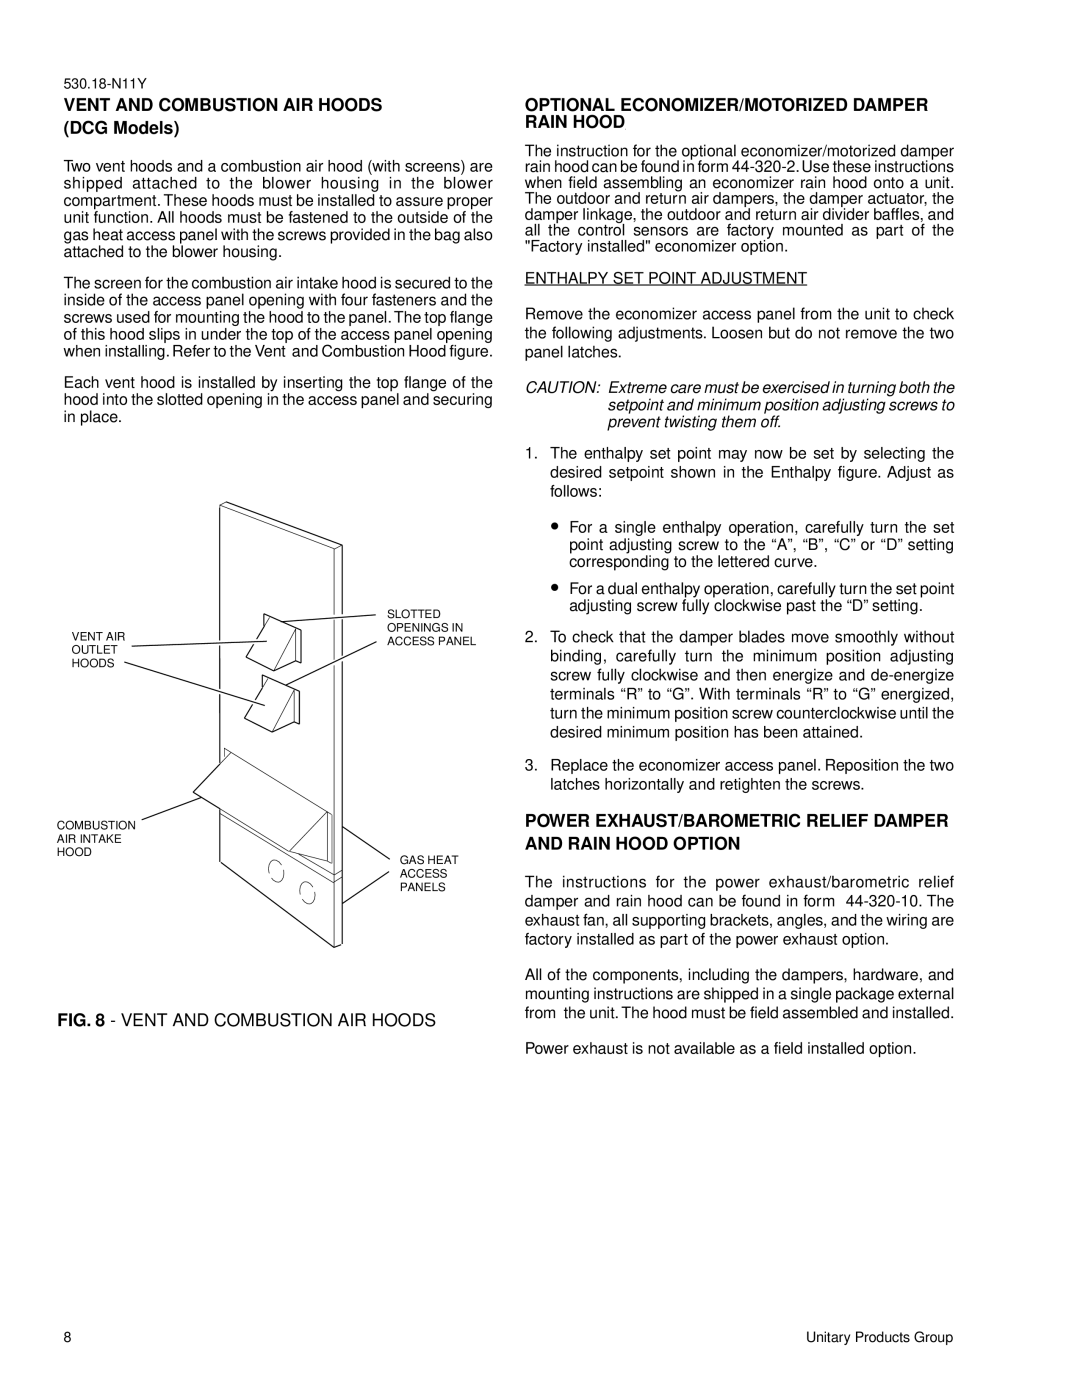 York D2CE, D2CG300 installation instructions VENT AND COMBUSTION AIR HOODS DCG Models, Vent And Combustion Air Hoods 